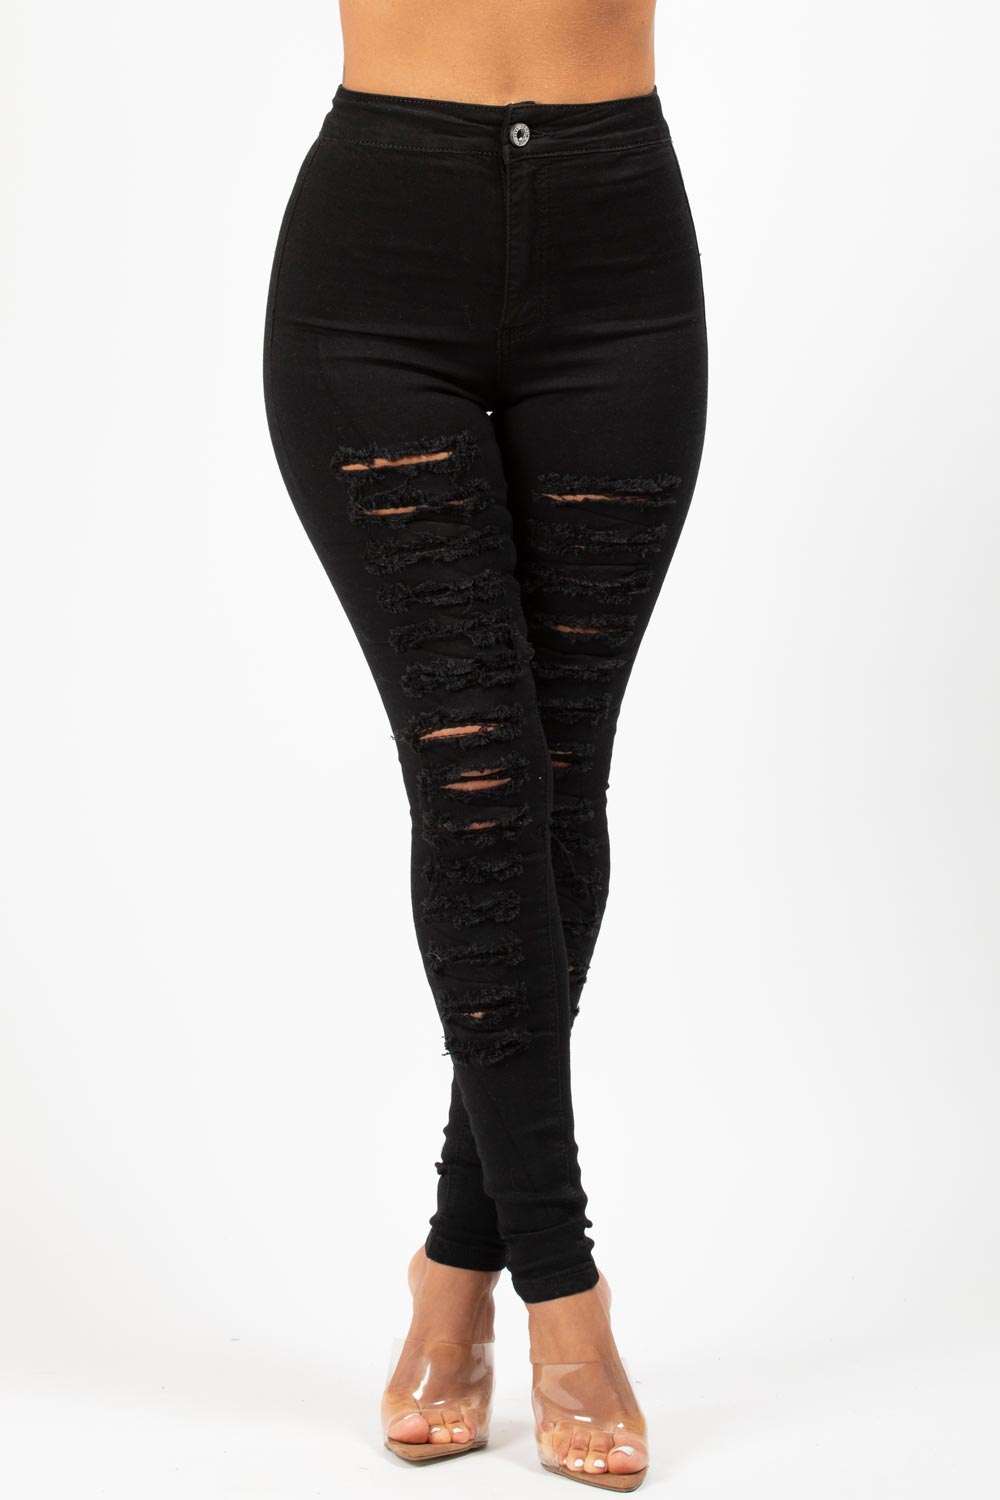 Black Ripped Skinny Jeans High Waisted